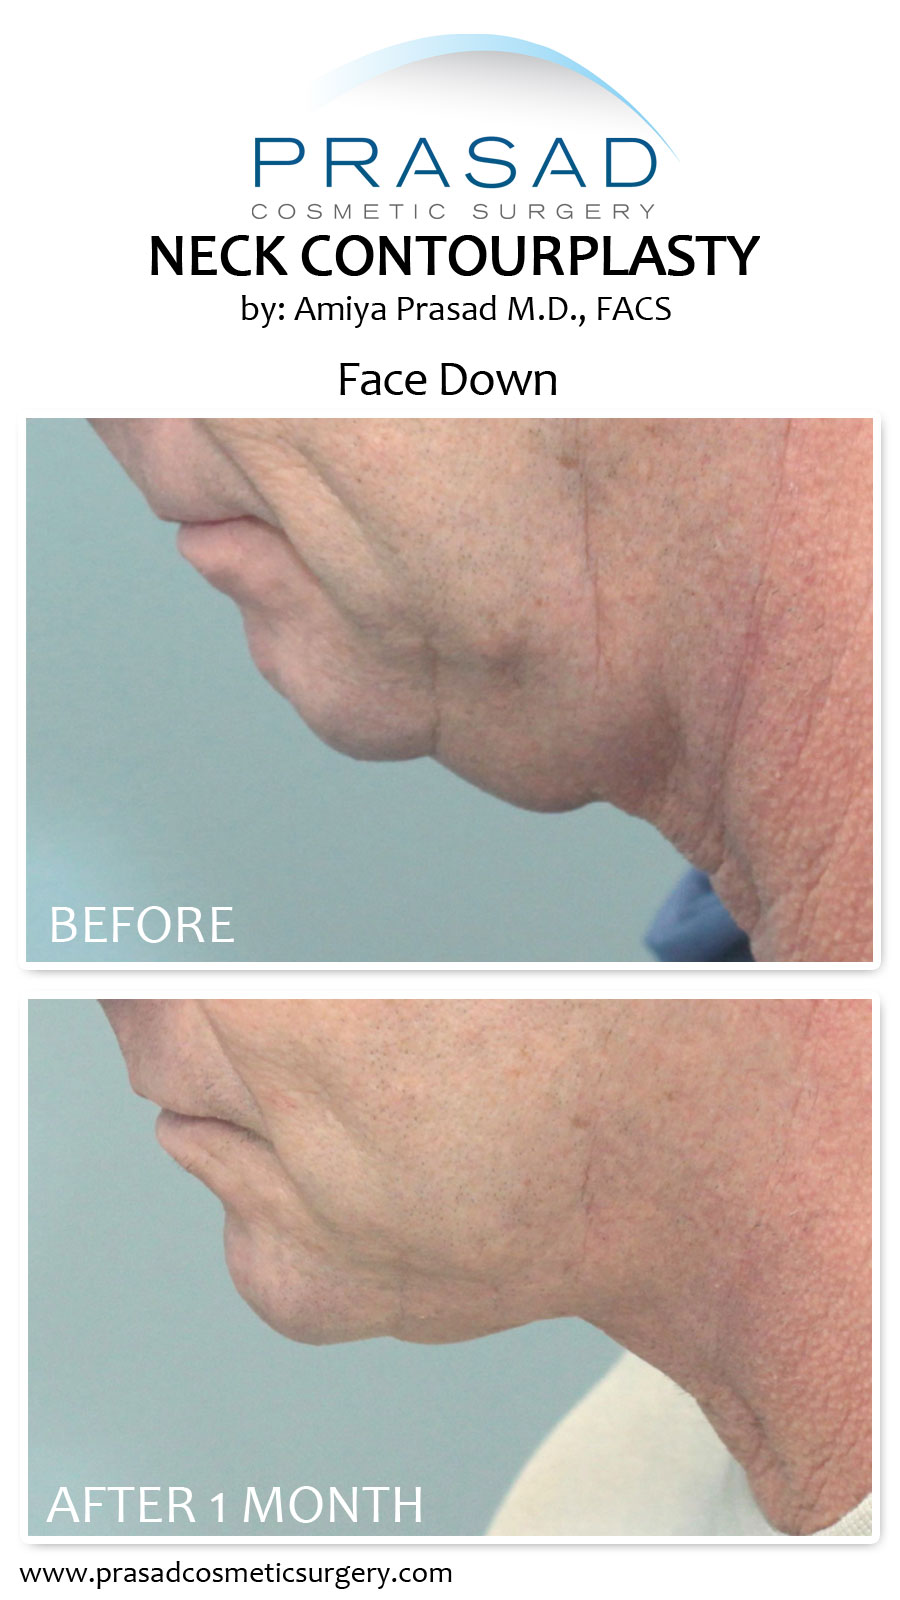 Neck Contourplasty for advanced neck sagging before and after